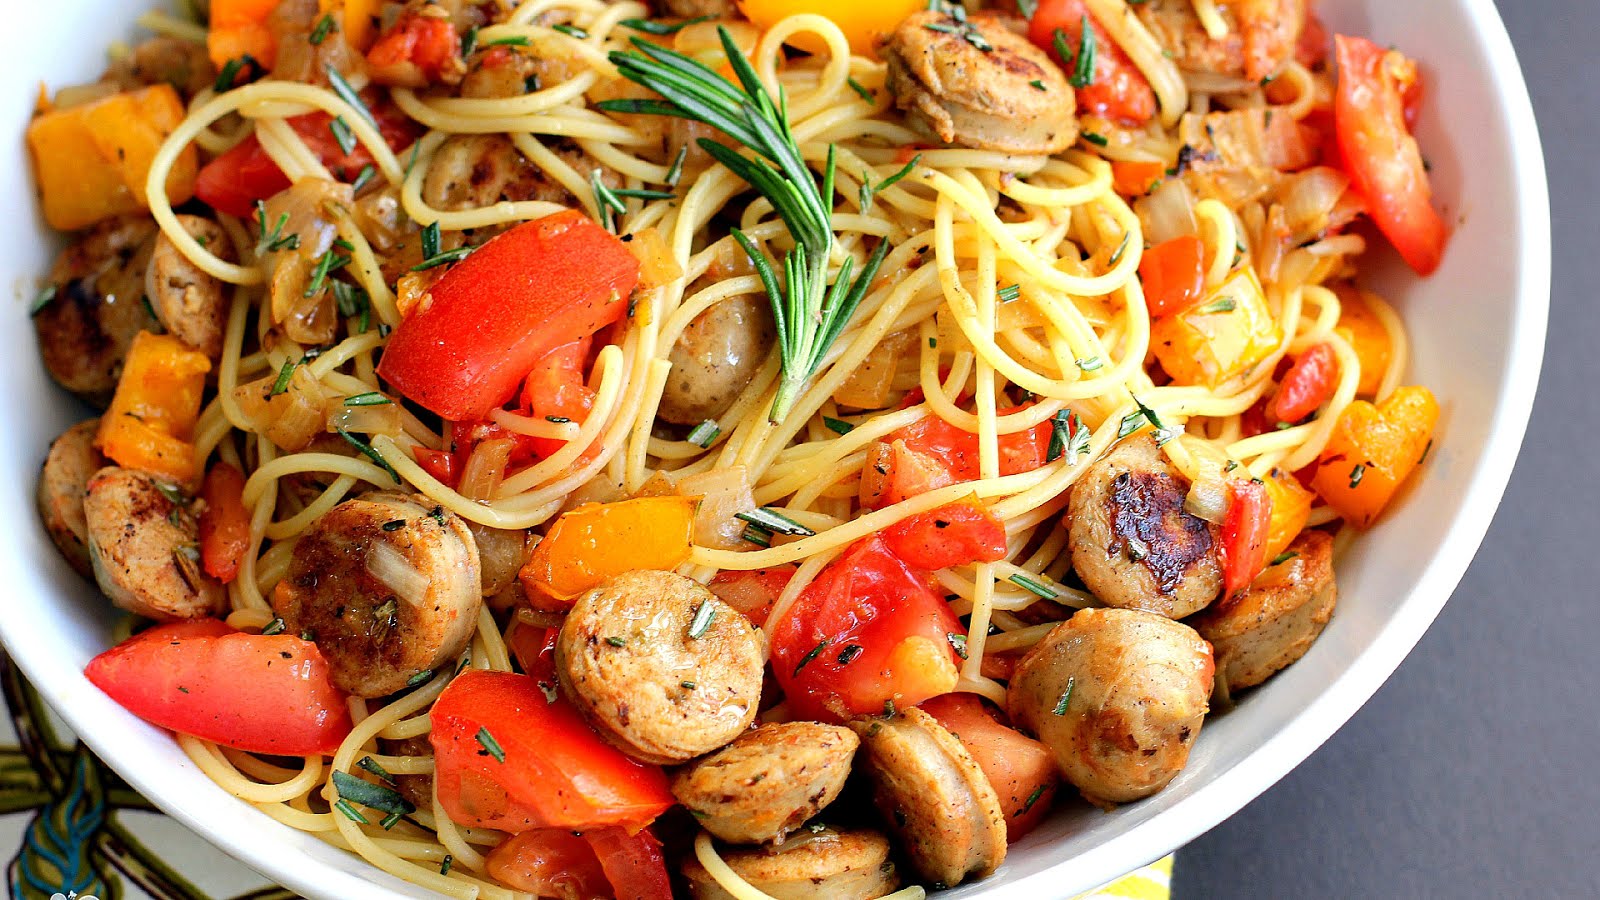 Chicken Sausage And Pasta Recipes - Recipe Choices